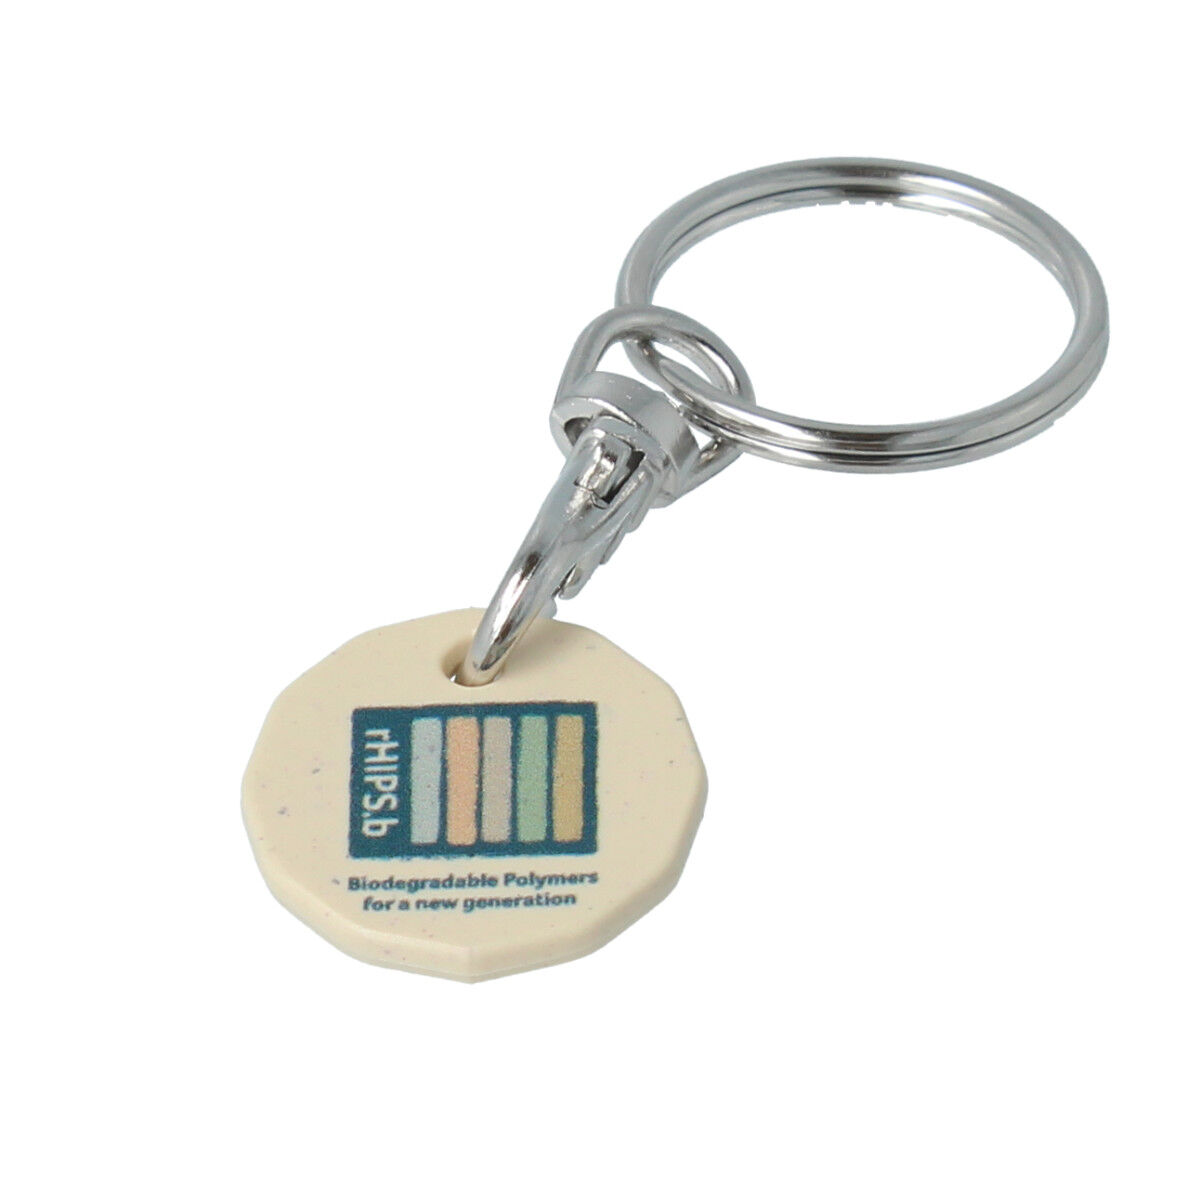 Recycled Plastic rHIPS Trolley Coin Keyring  (sand colour)